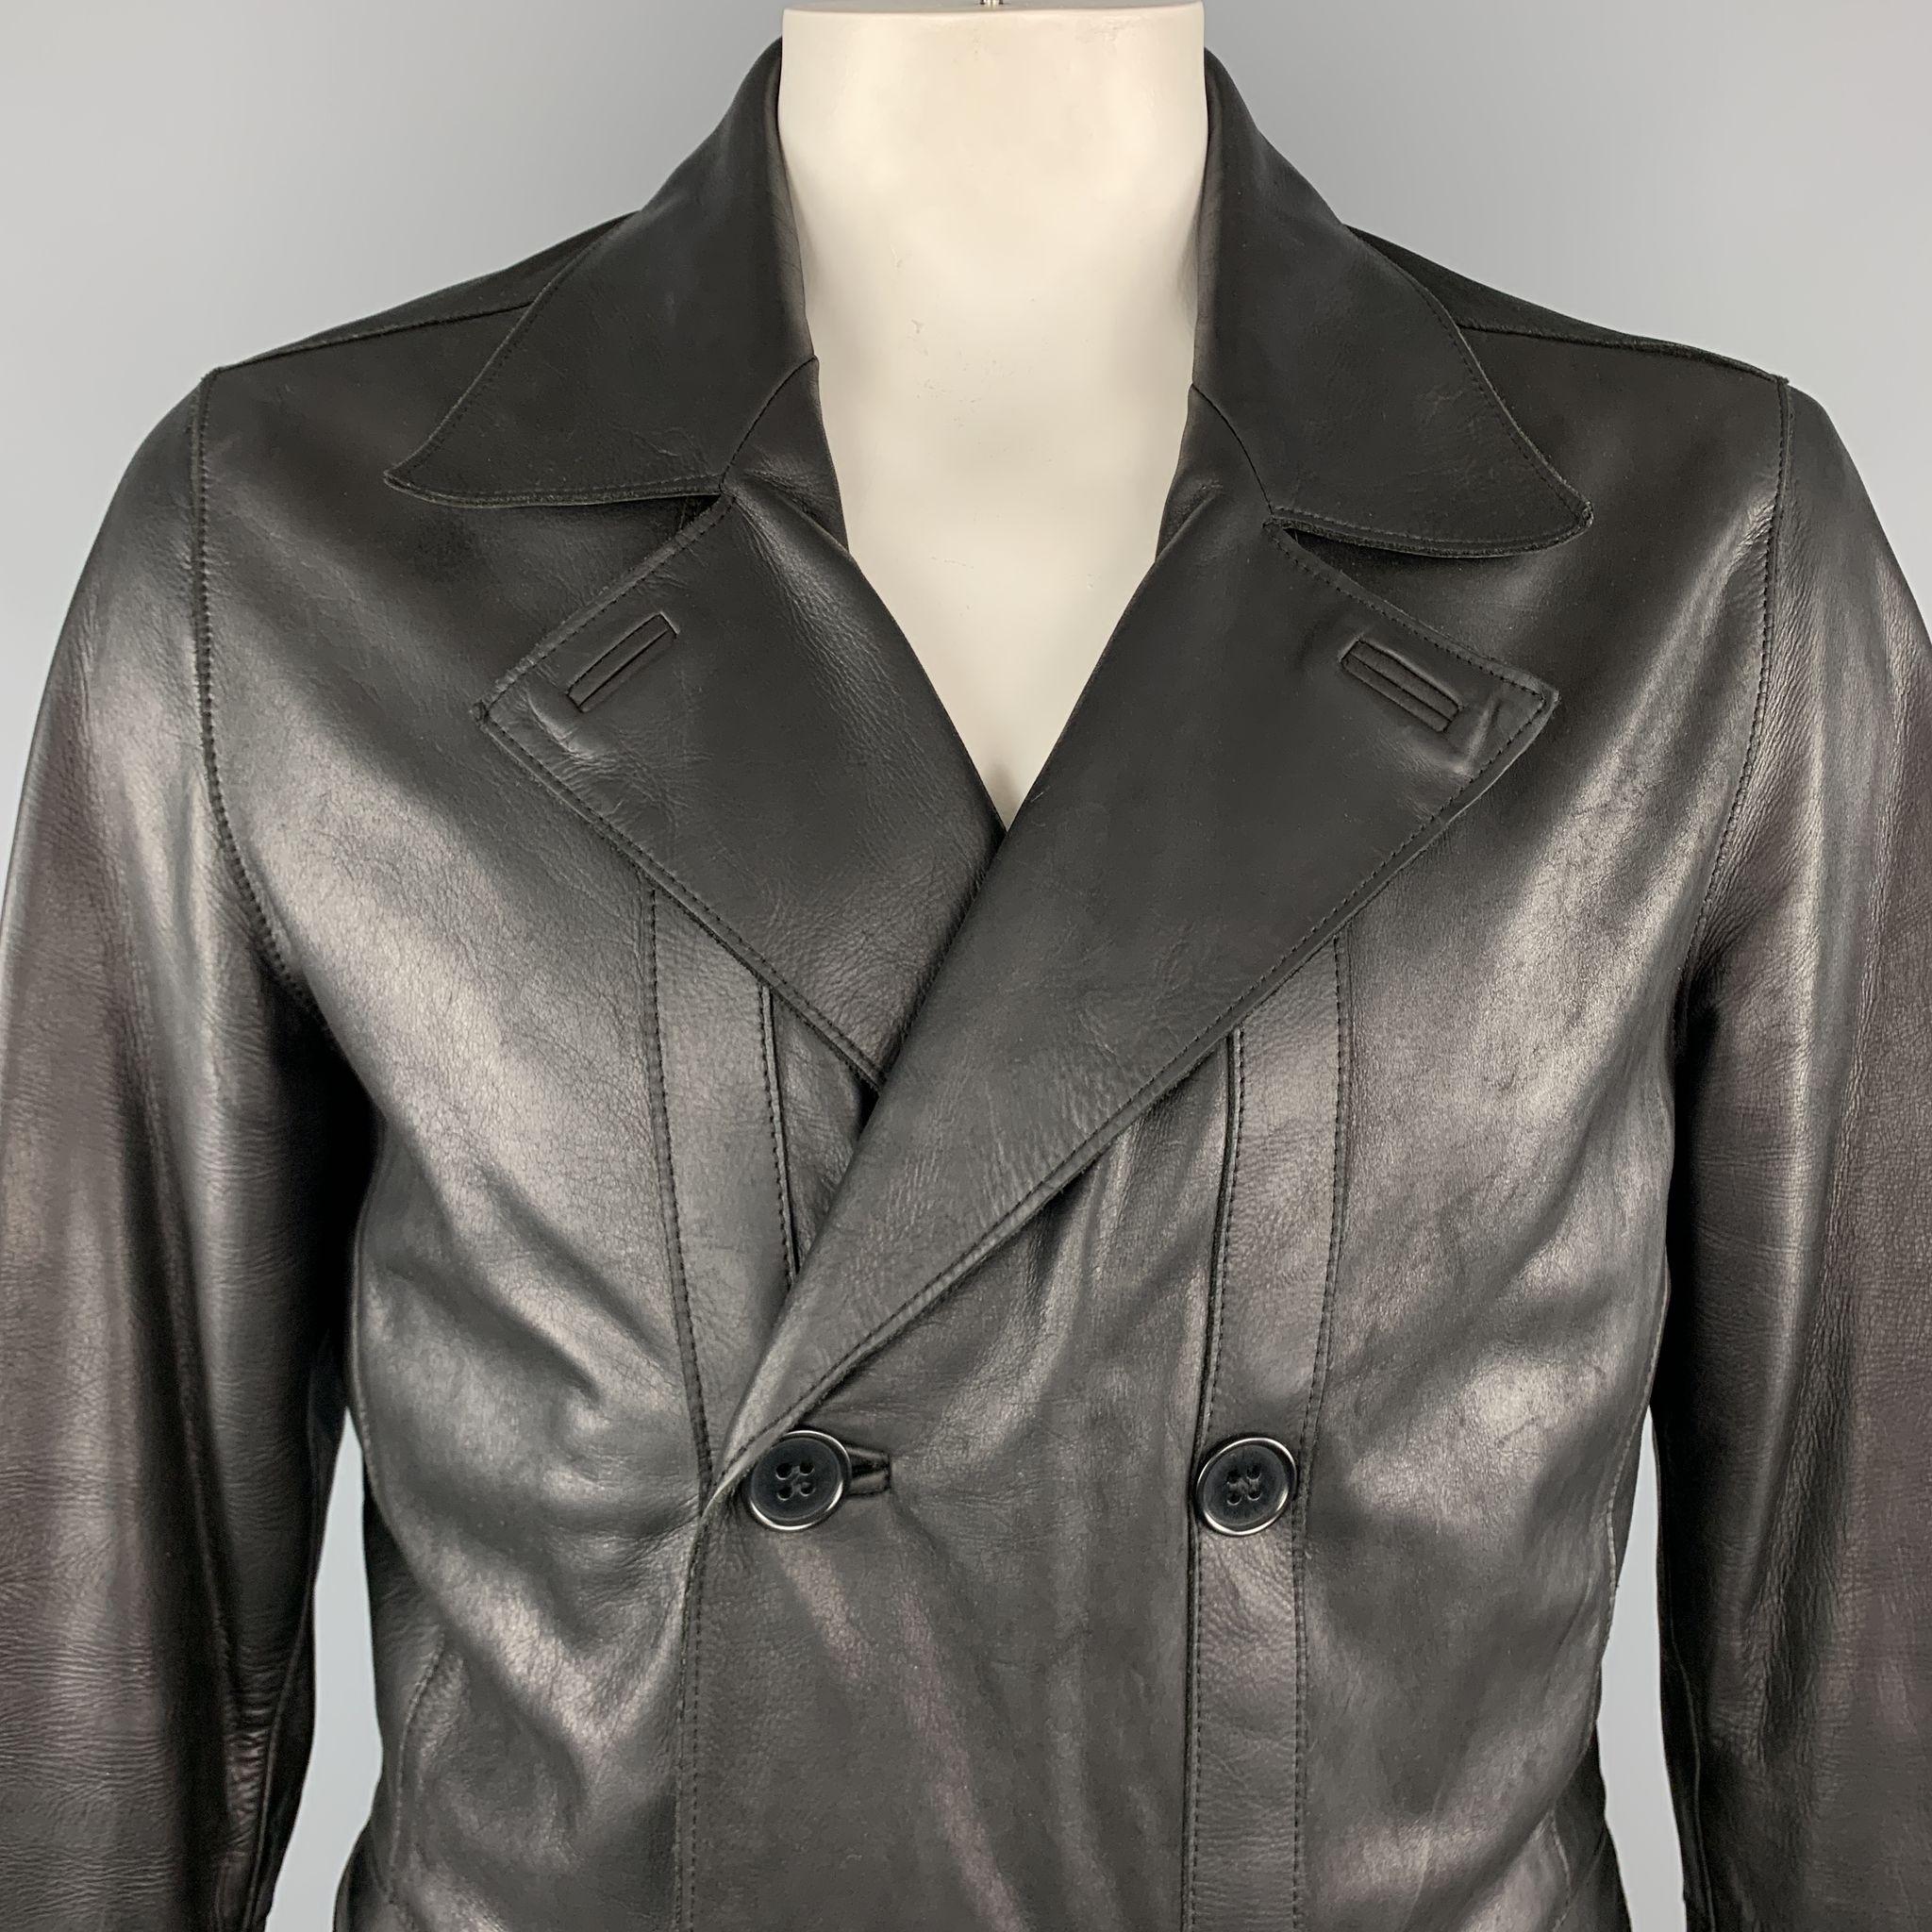 TED BAKER peacoat comes in black leather with a double breasted  button front, pointed lapel, and flap pockets. 

Very Good Pre-Owned Condition.
Marked: JP 4

Measurements:

Shoulder: 17 in.
Chest: 42 in.
Sleeve: 27 in.
Length: 33 in.